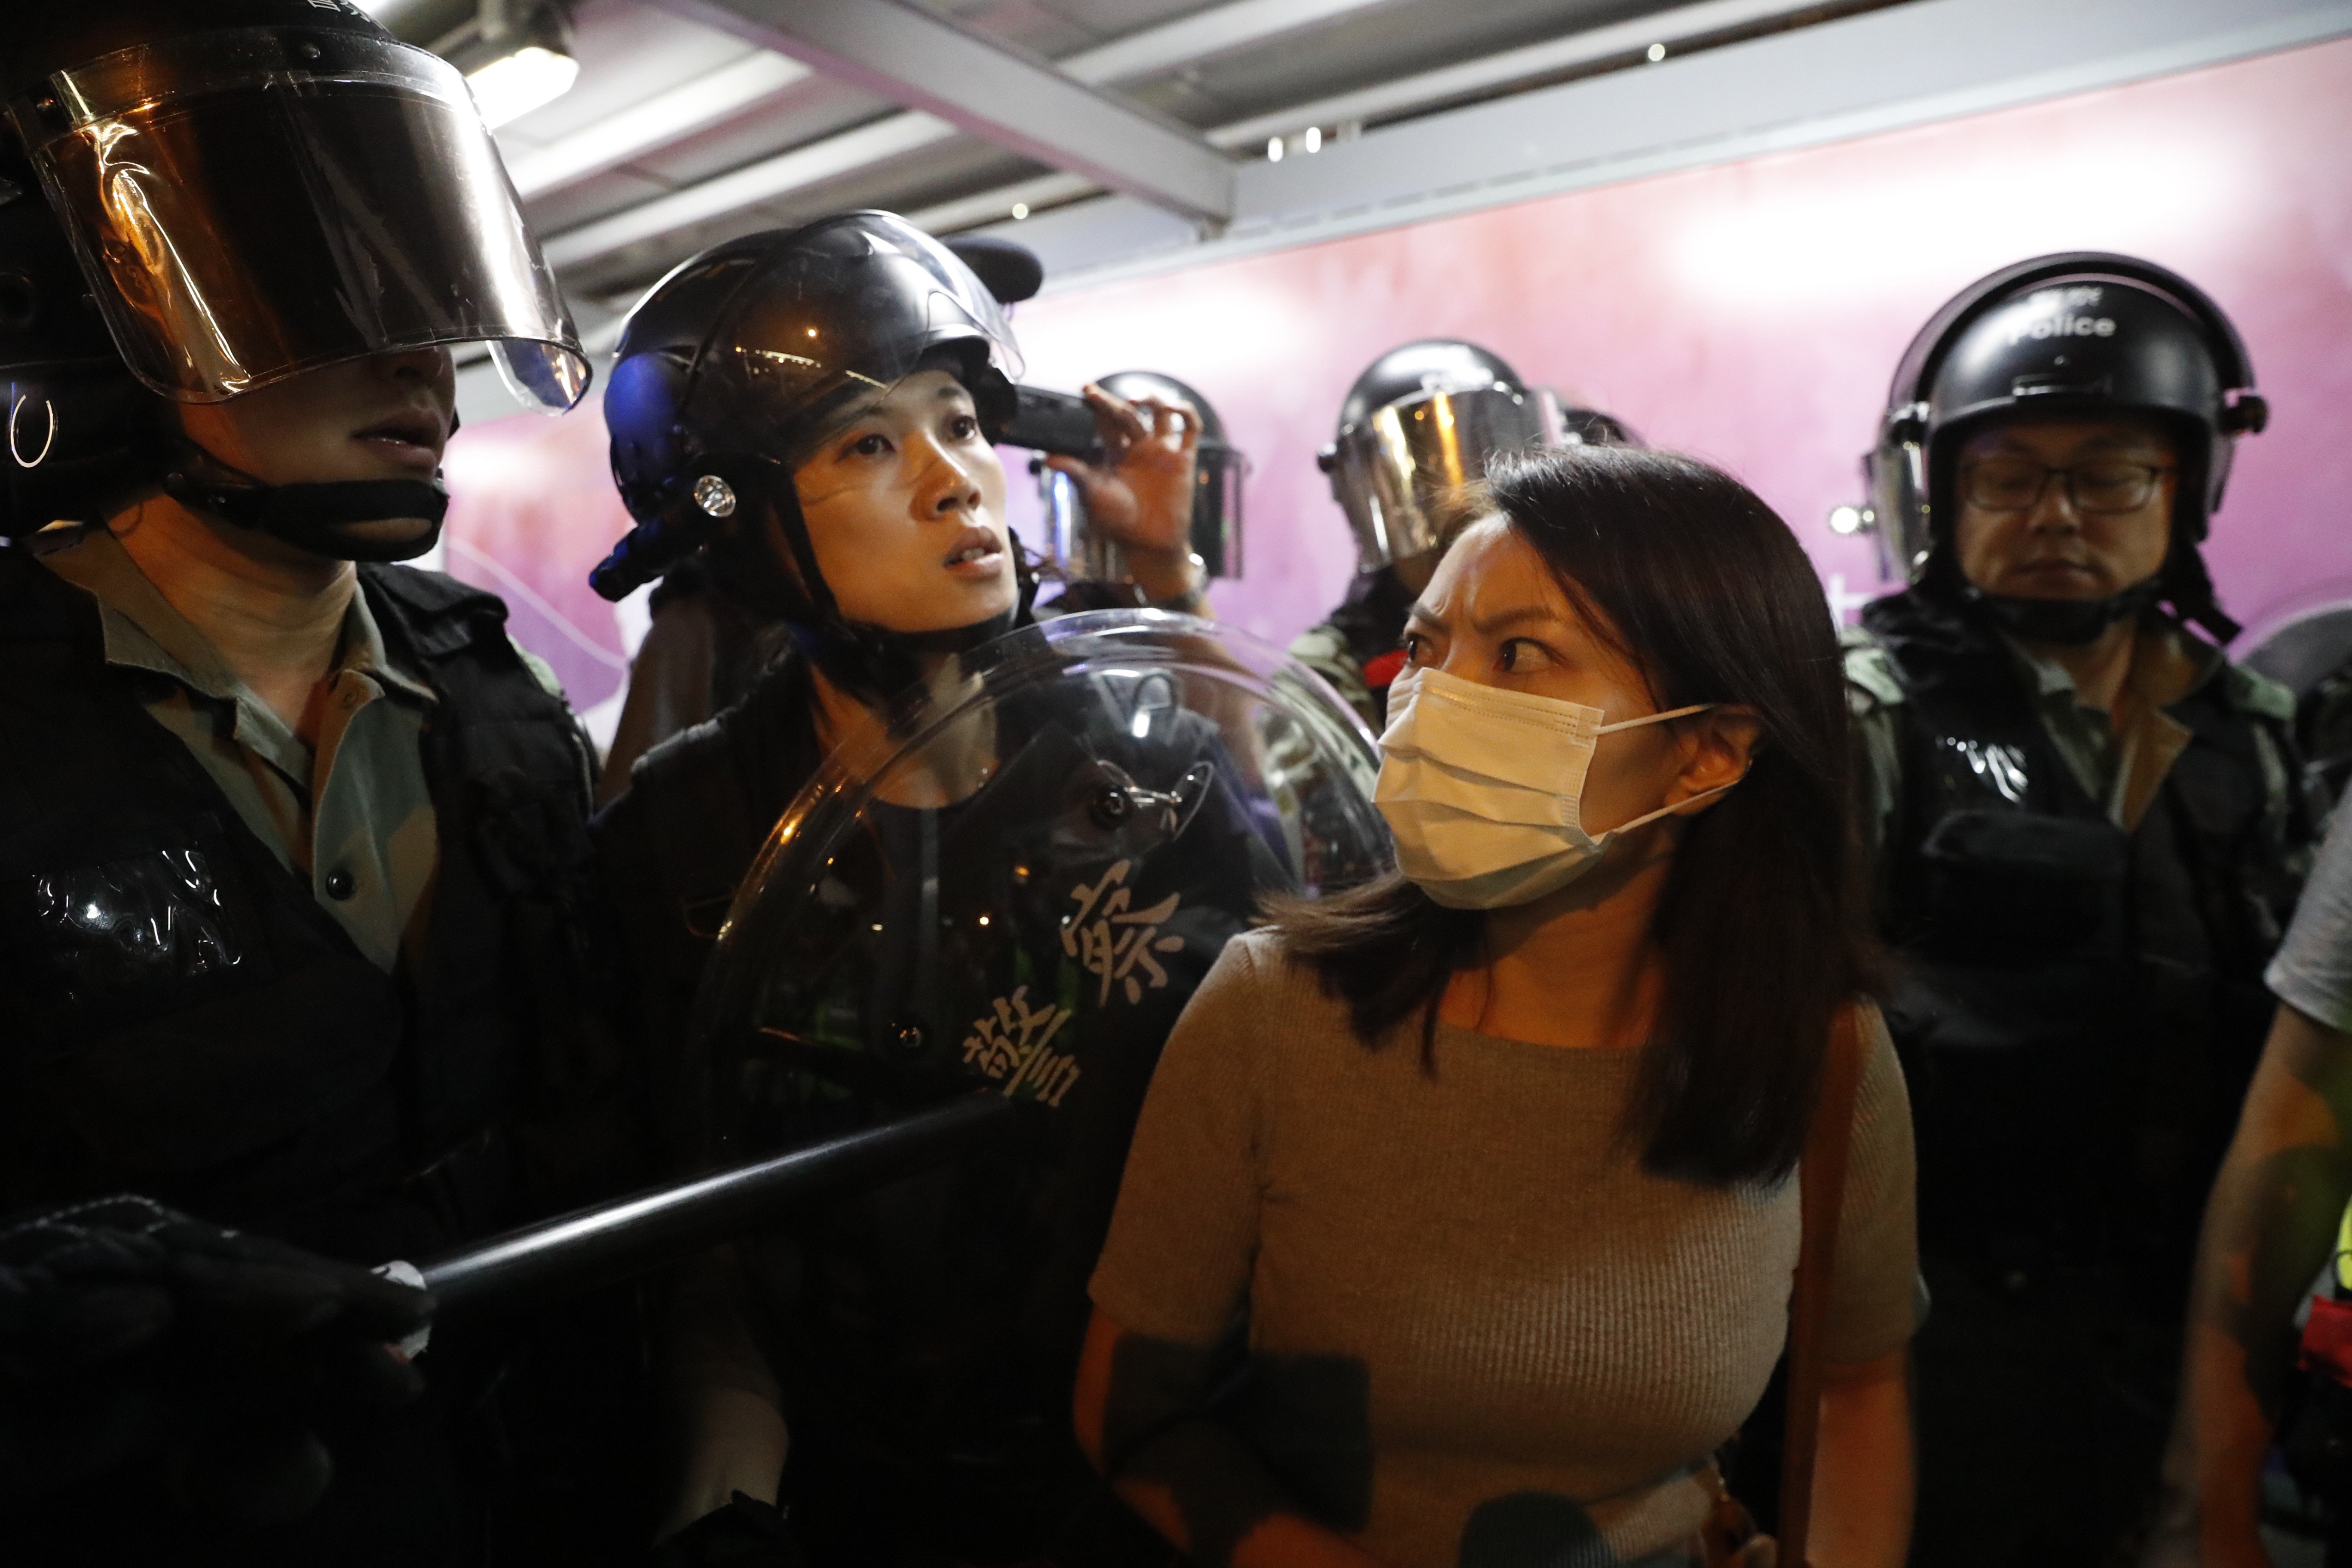 A member of the public reacts as police arrest people on suspicion of being anti-government protesters, in the Kowloon Bay area of Hong Kong on September 3. Photo: EPA-EFE